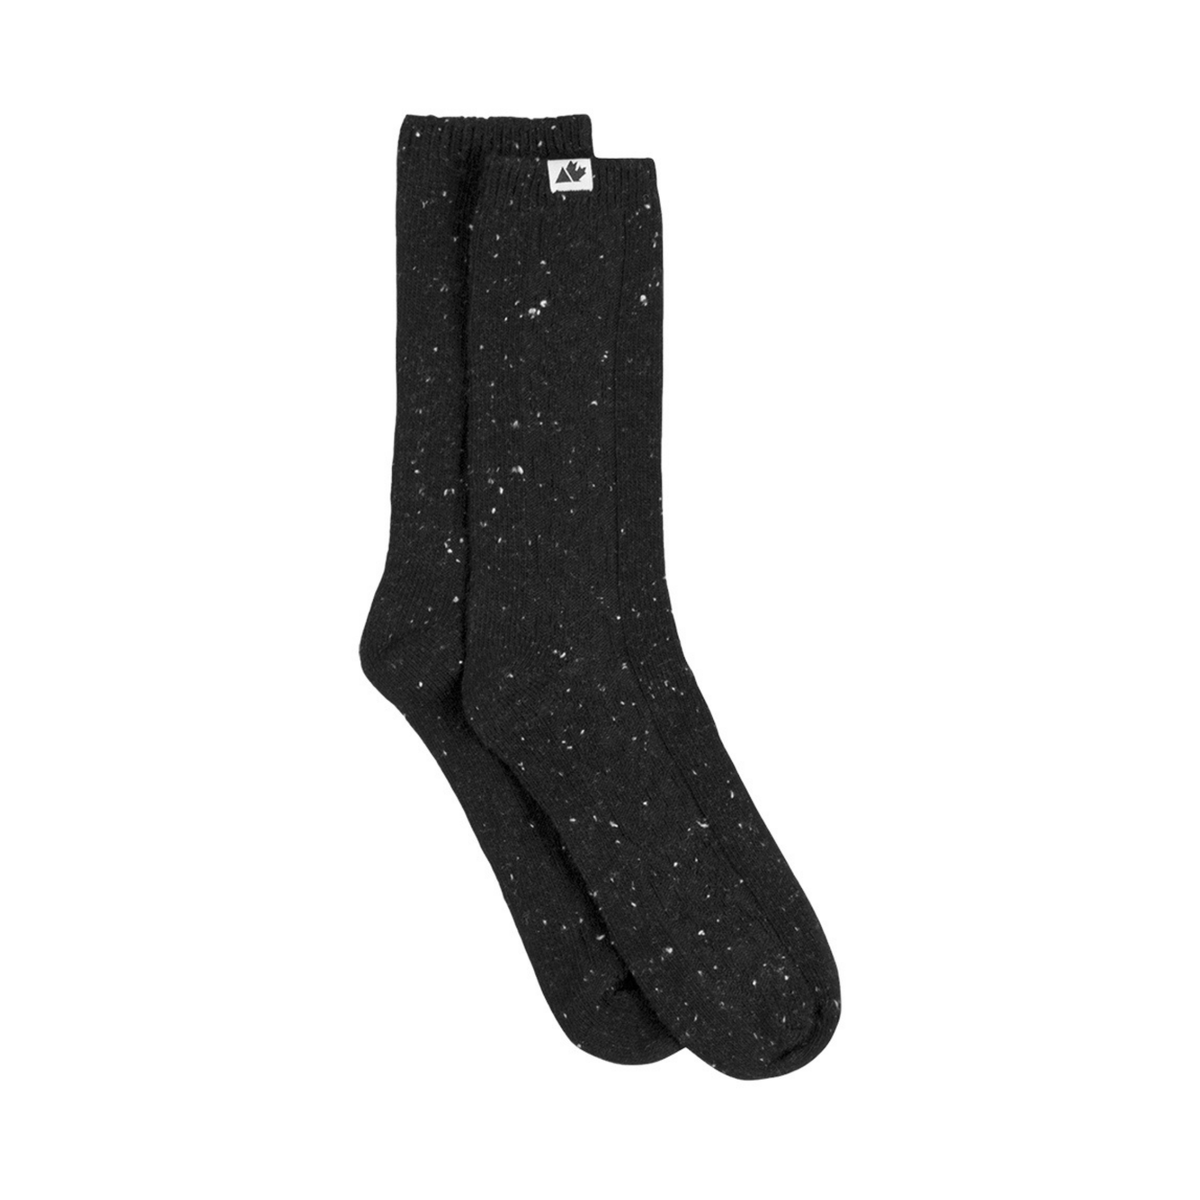 GN Nep Acrylic/Poly Blend Crew Sock - 2 Pack